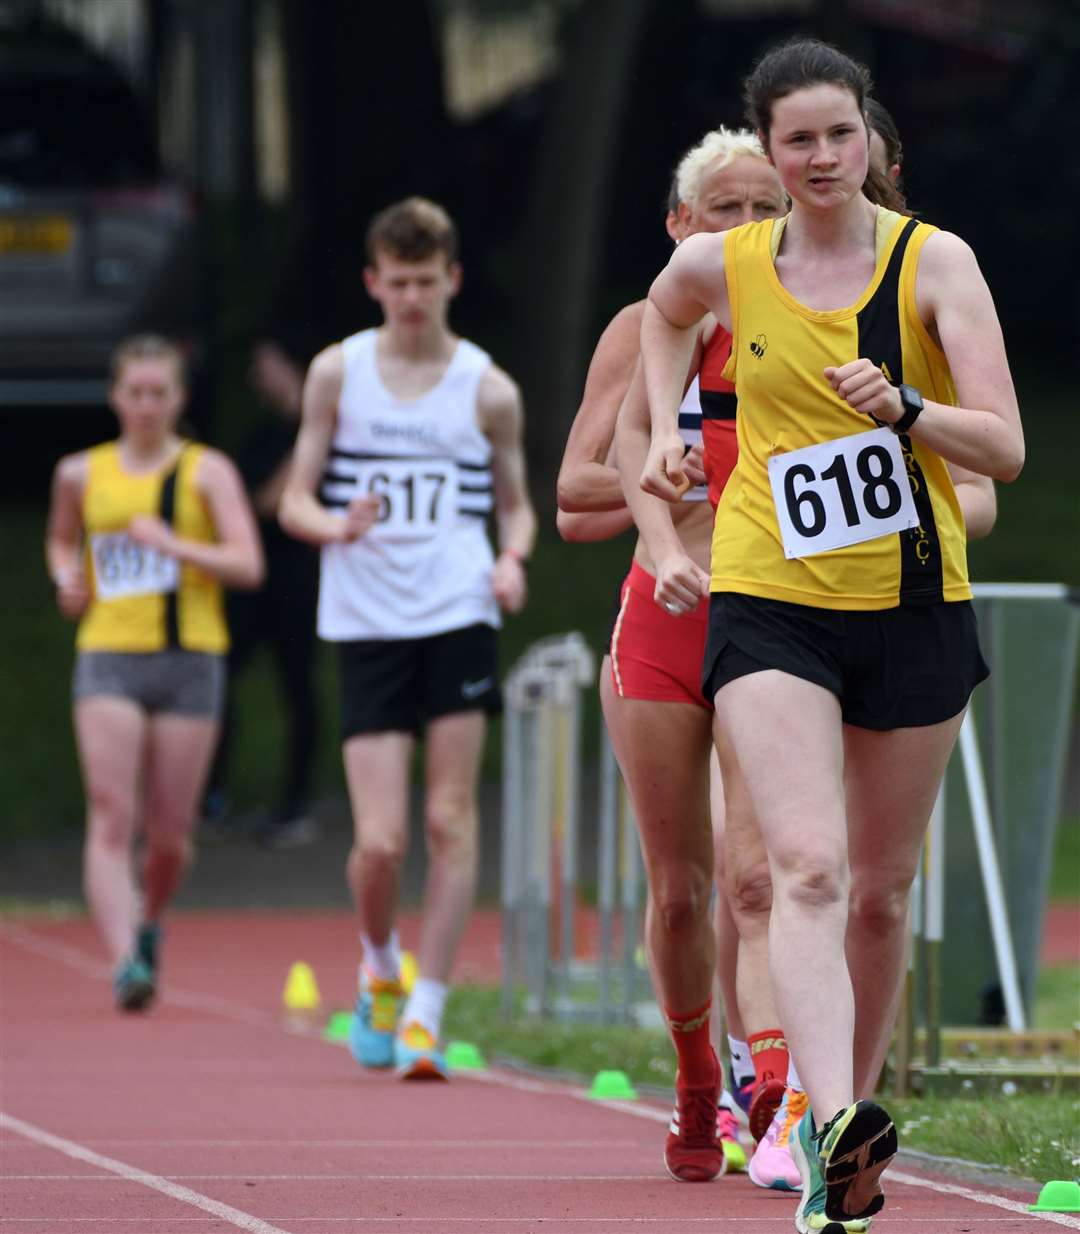 There was a win in the senior women's 3,000m walk for Ashford AC's Jacqueline Benson. Picture: Barry Goodwin (56699749)